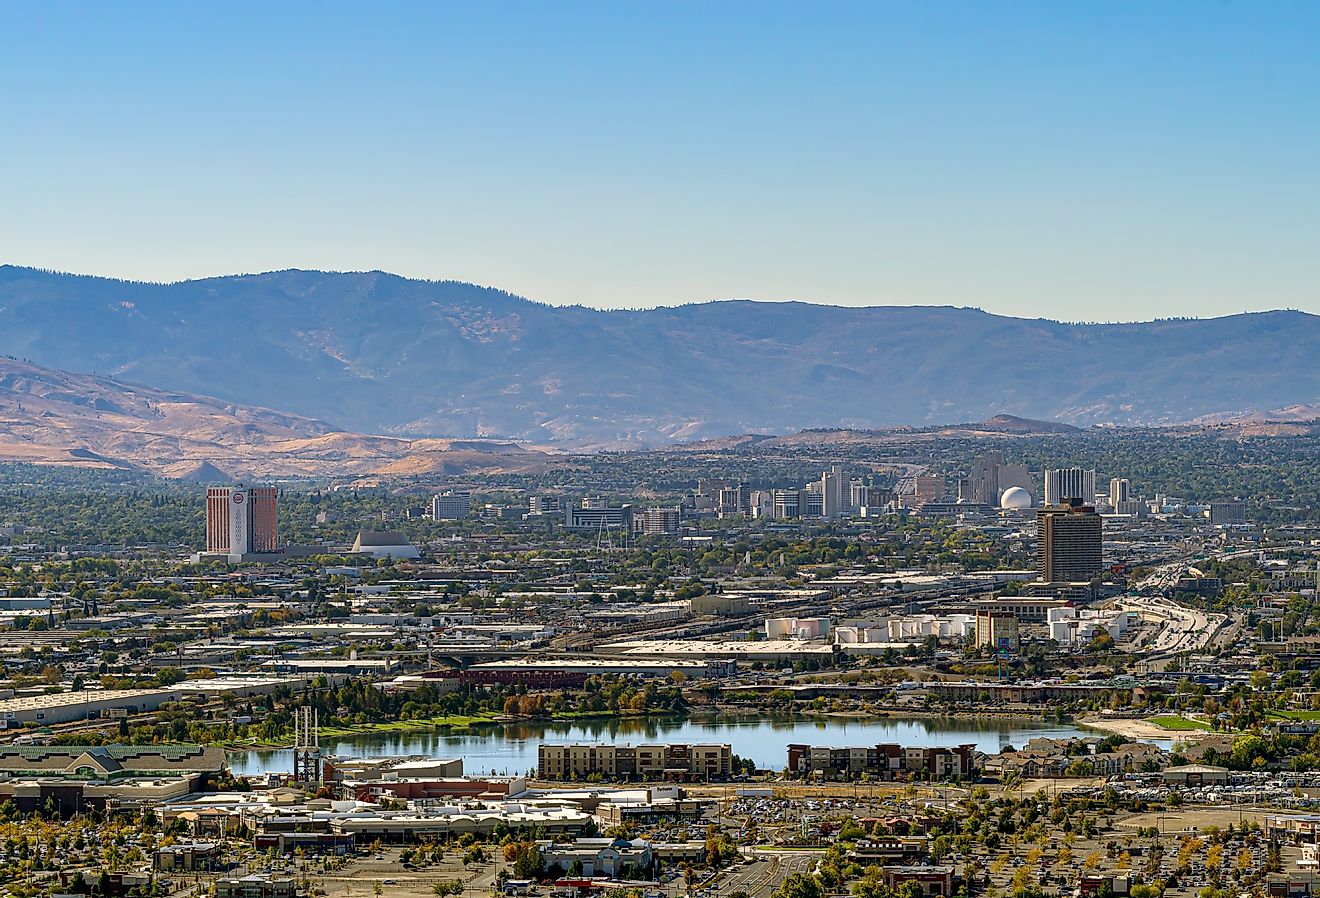 Reno-Sparks, Nevada cityscape with hotels and casinos on a hazy autumn day. Image credit Gchapel via Shutterstock